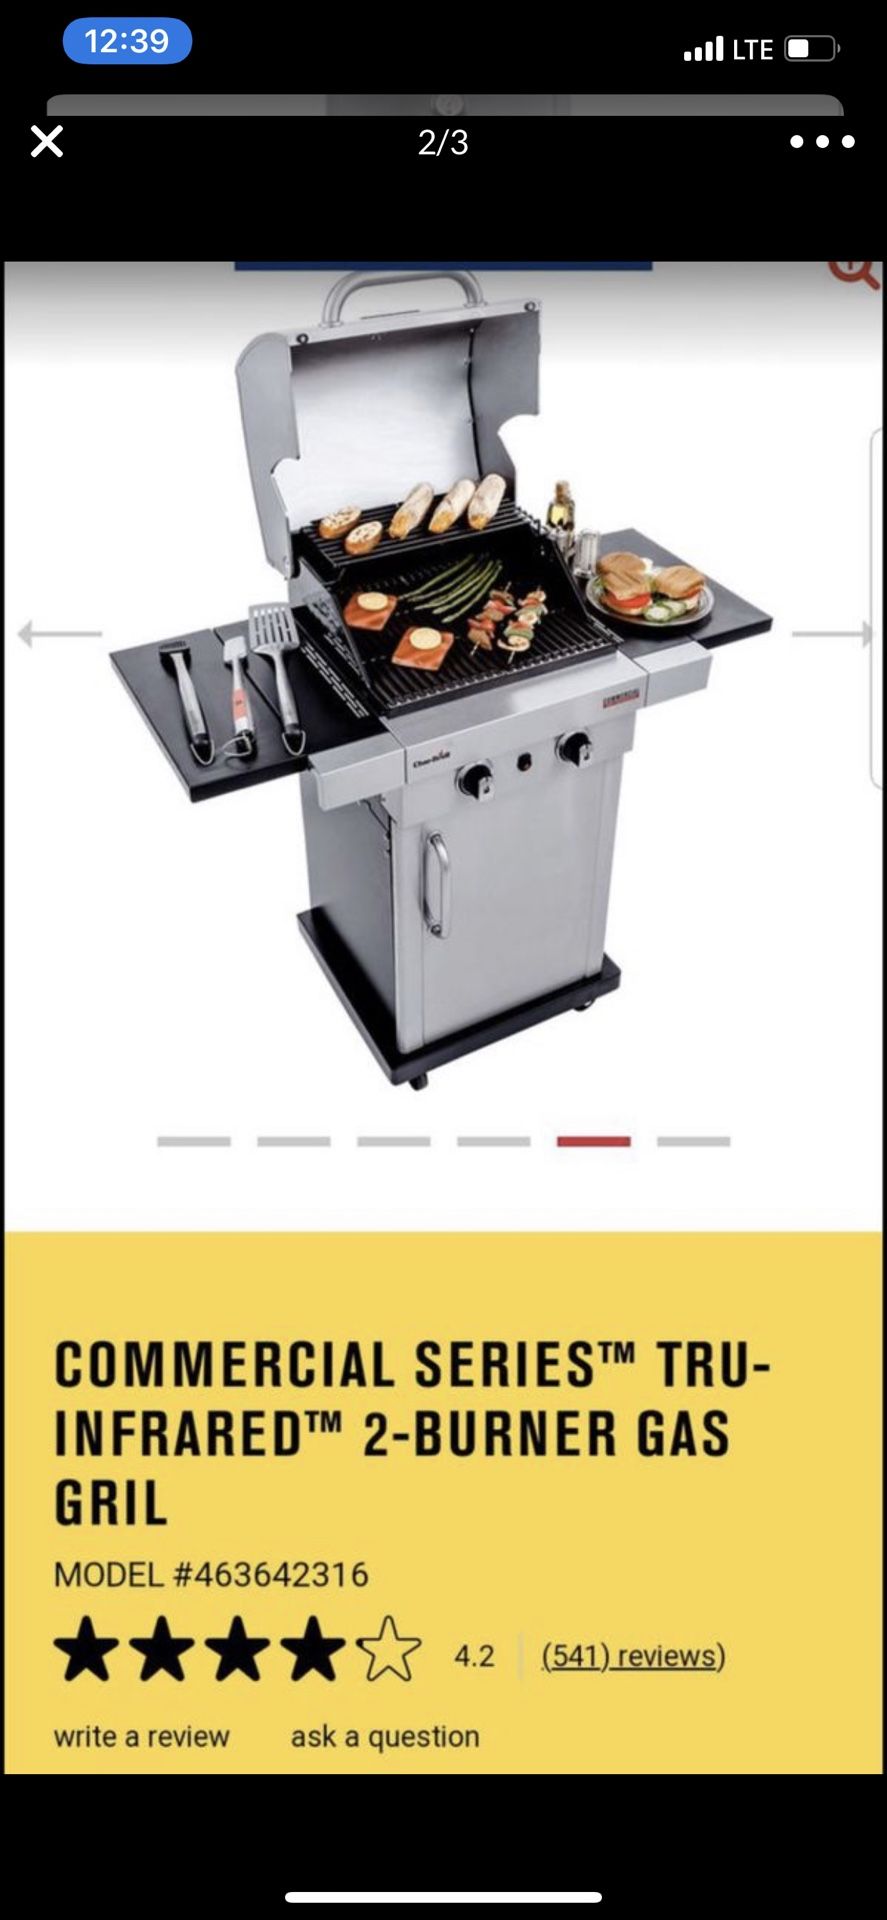 BRAND NEW BBQ grill New char broil commercial series